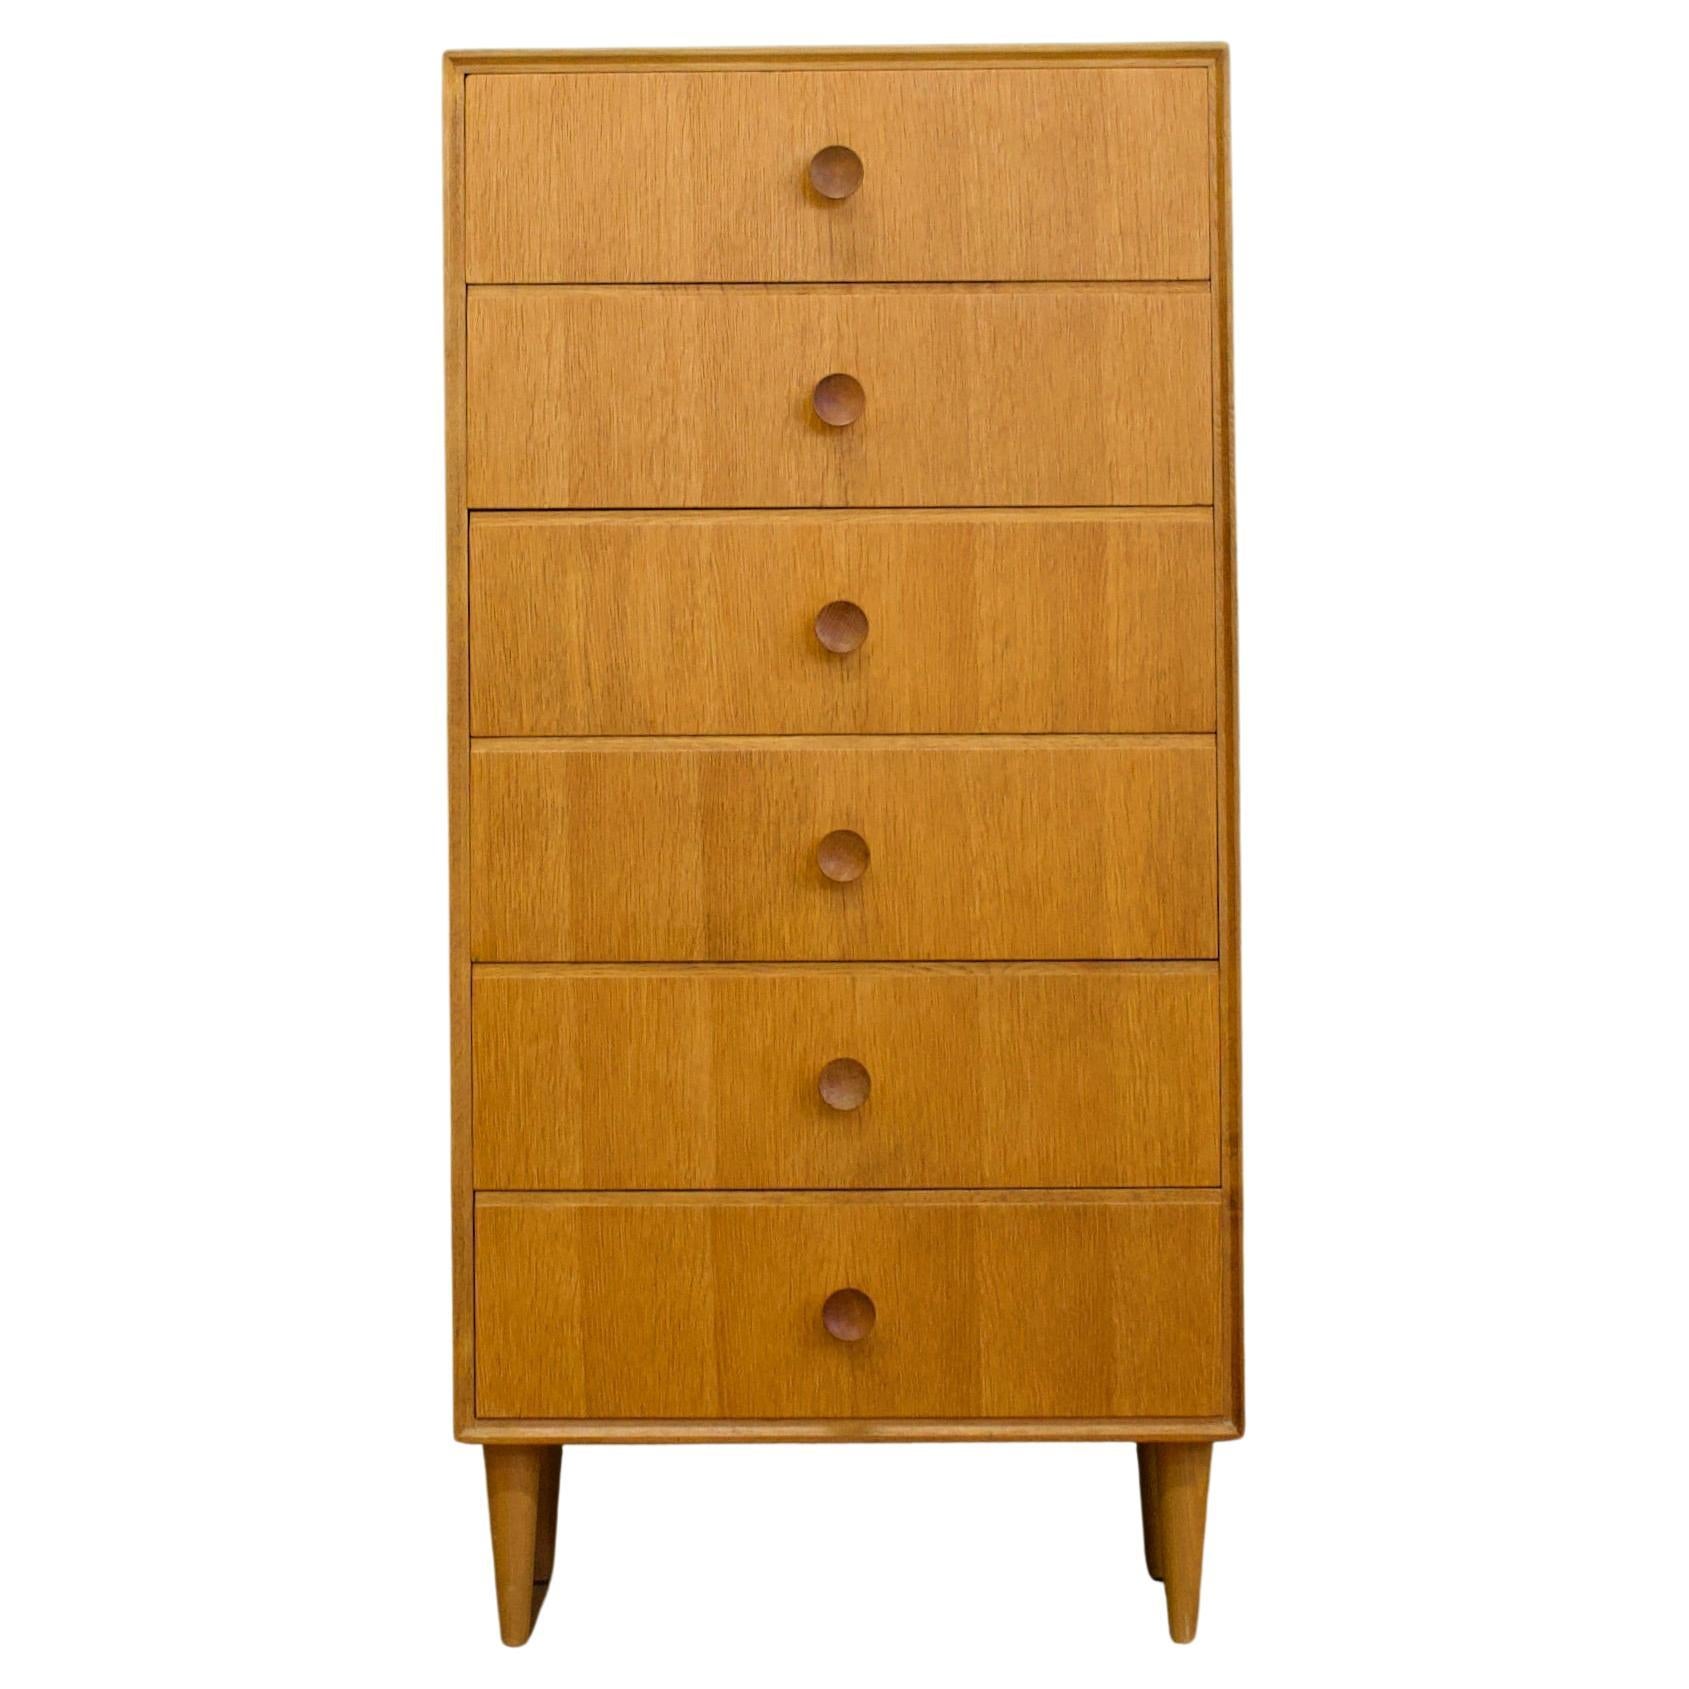 Midcentury, Oak Tallboy Chest of Drawers by Meredew, 1960s